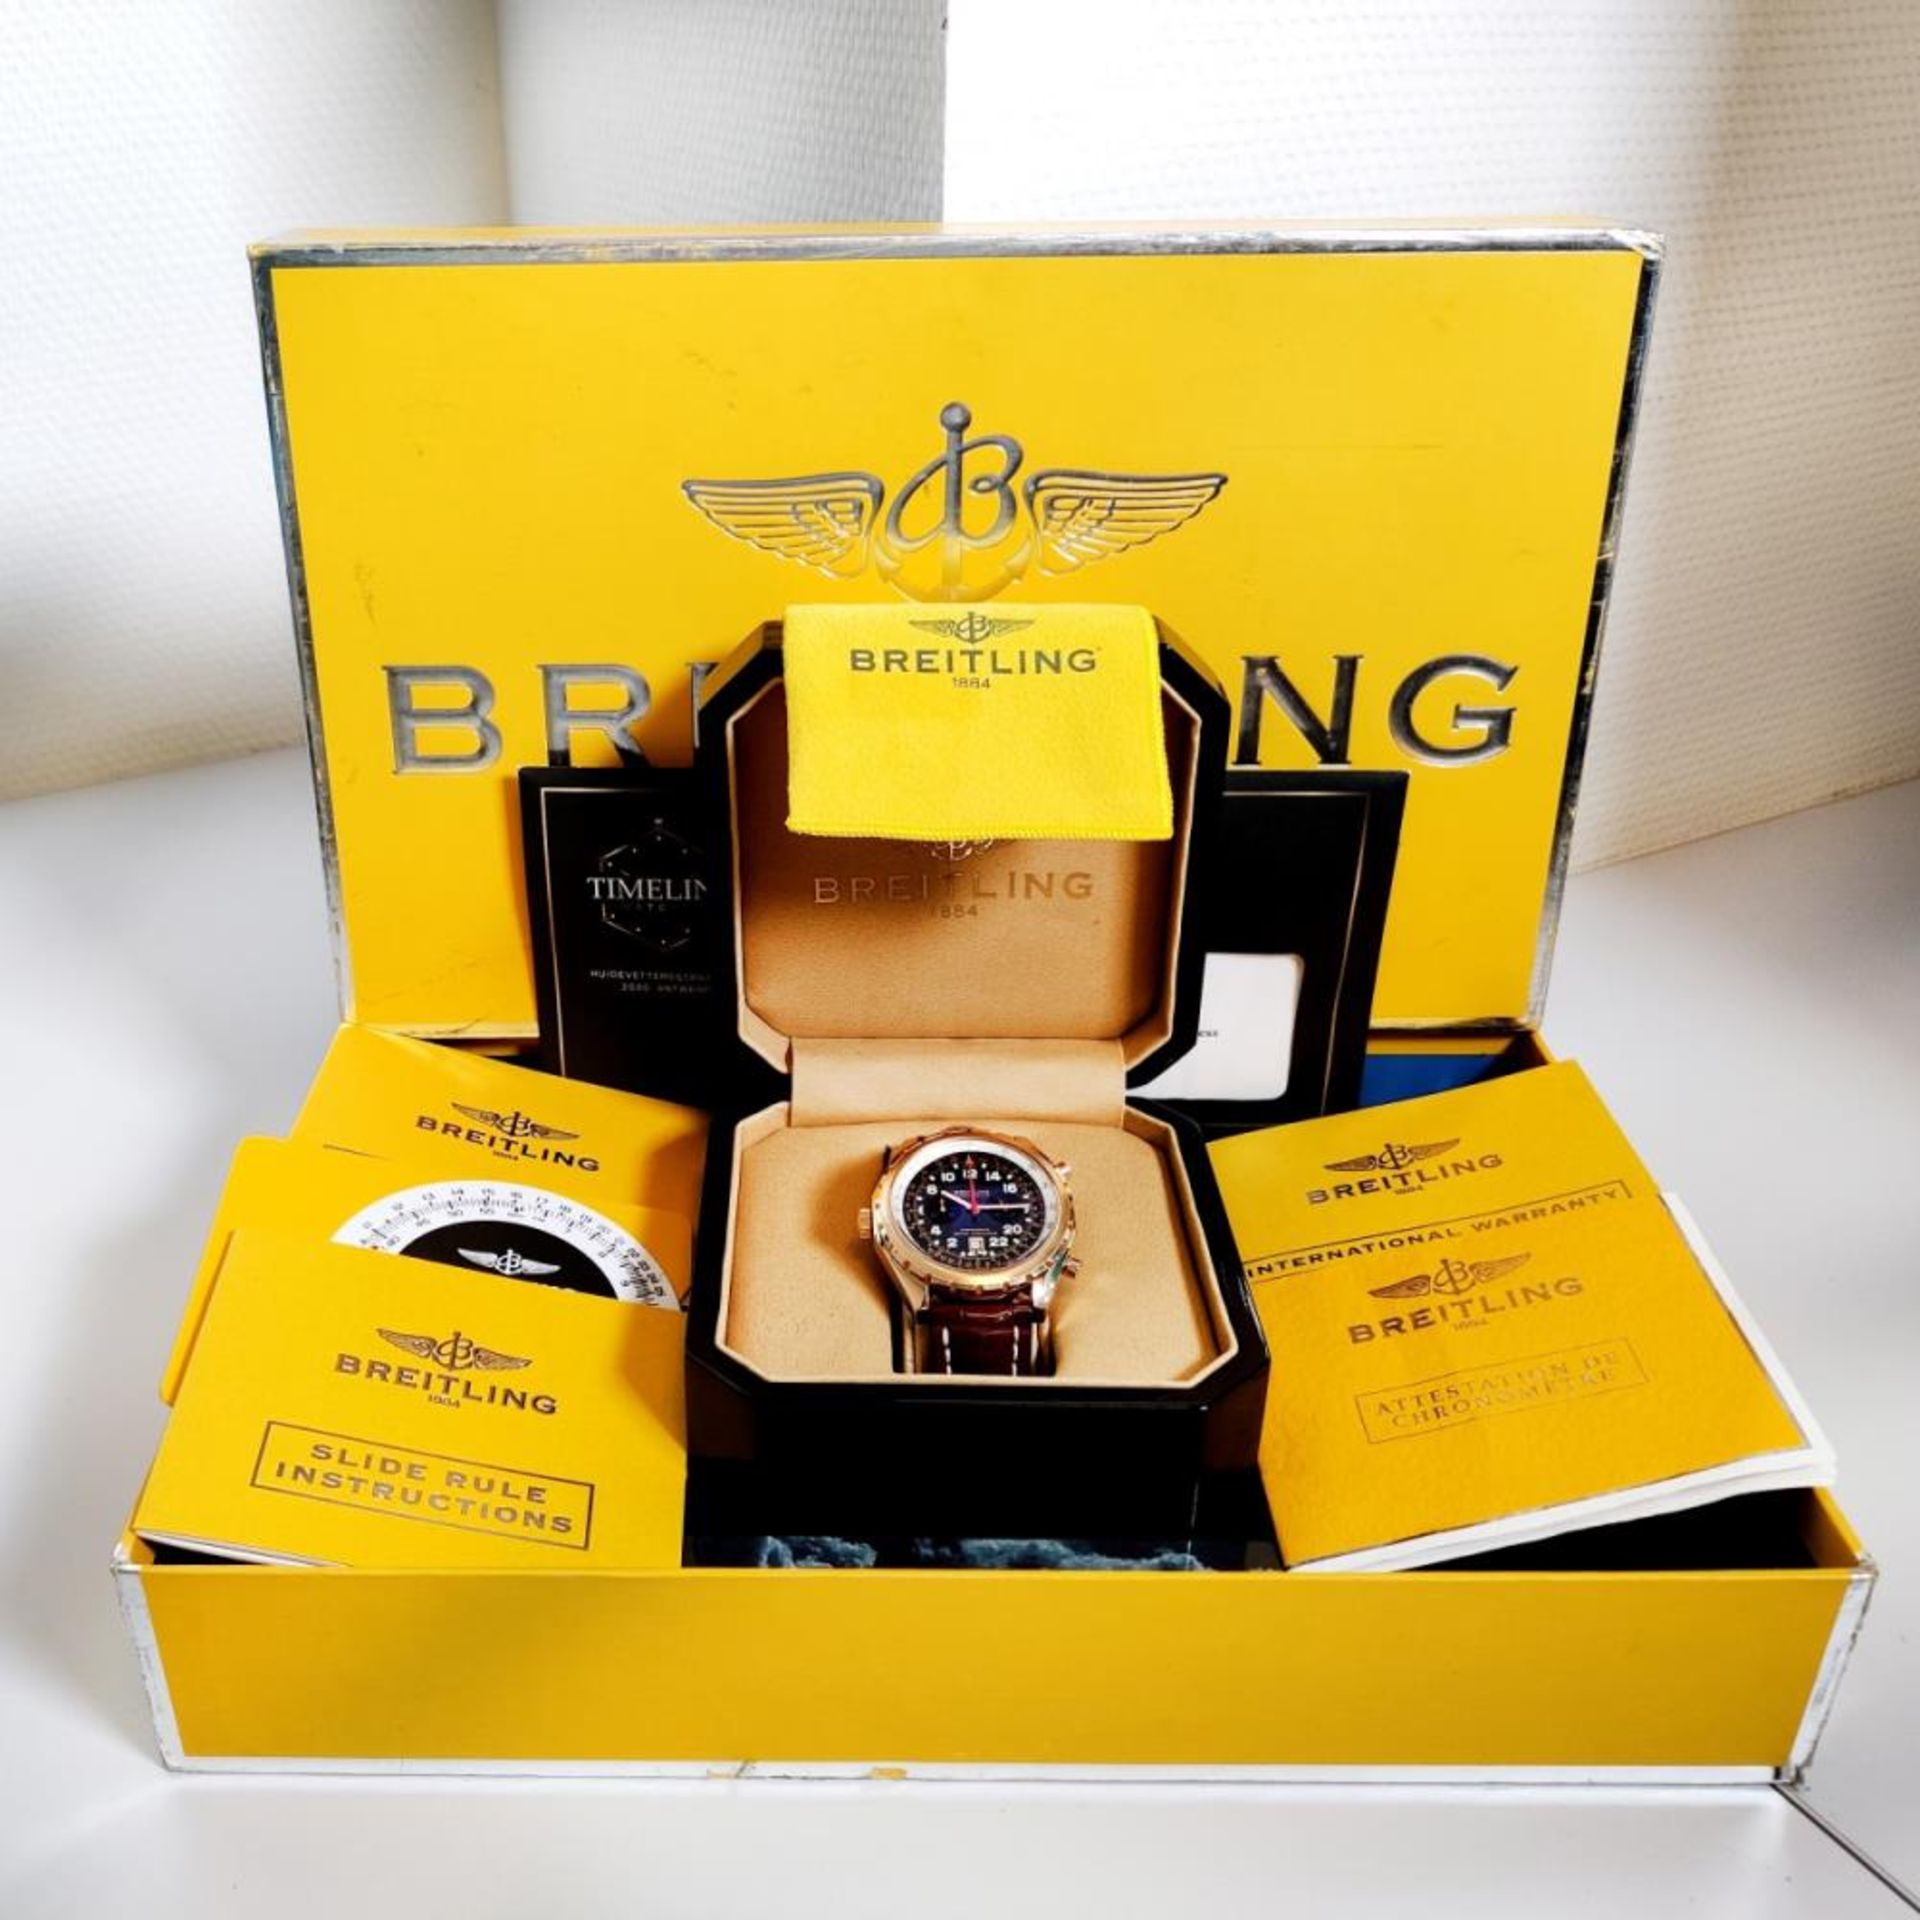 Breitling Chrono-Matic H22360 - Men's watch - 2006. - Image 11 of 12